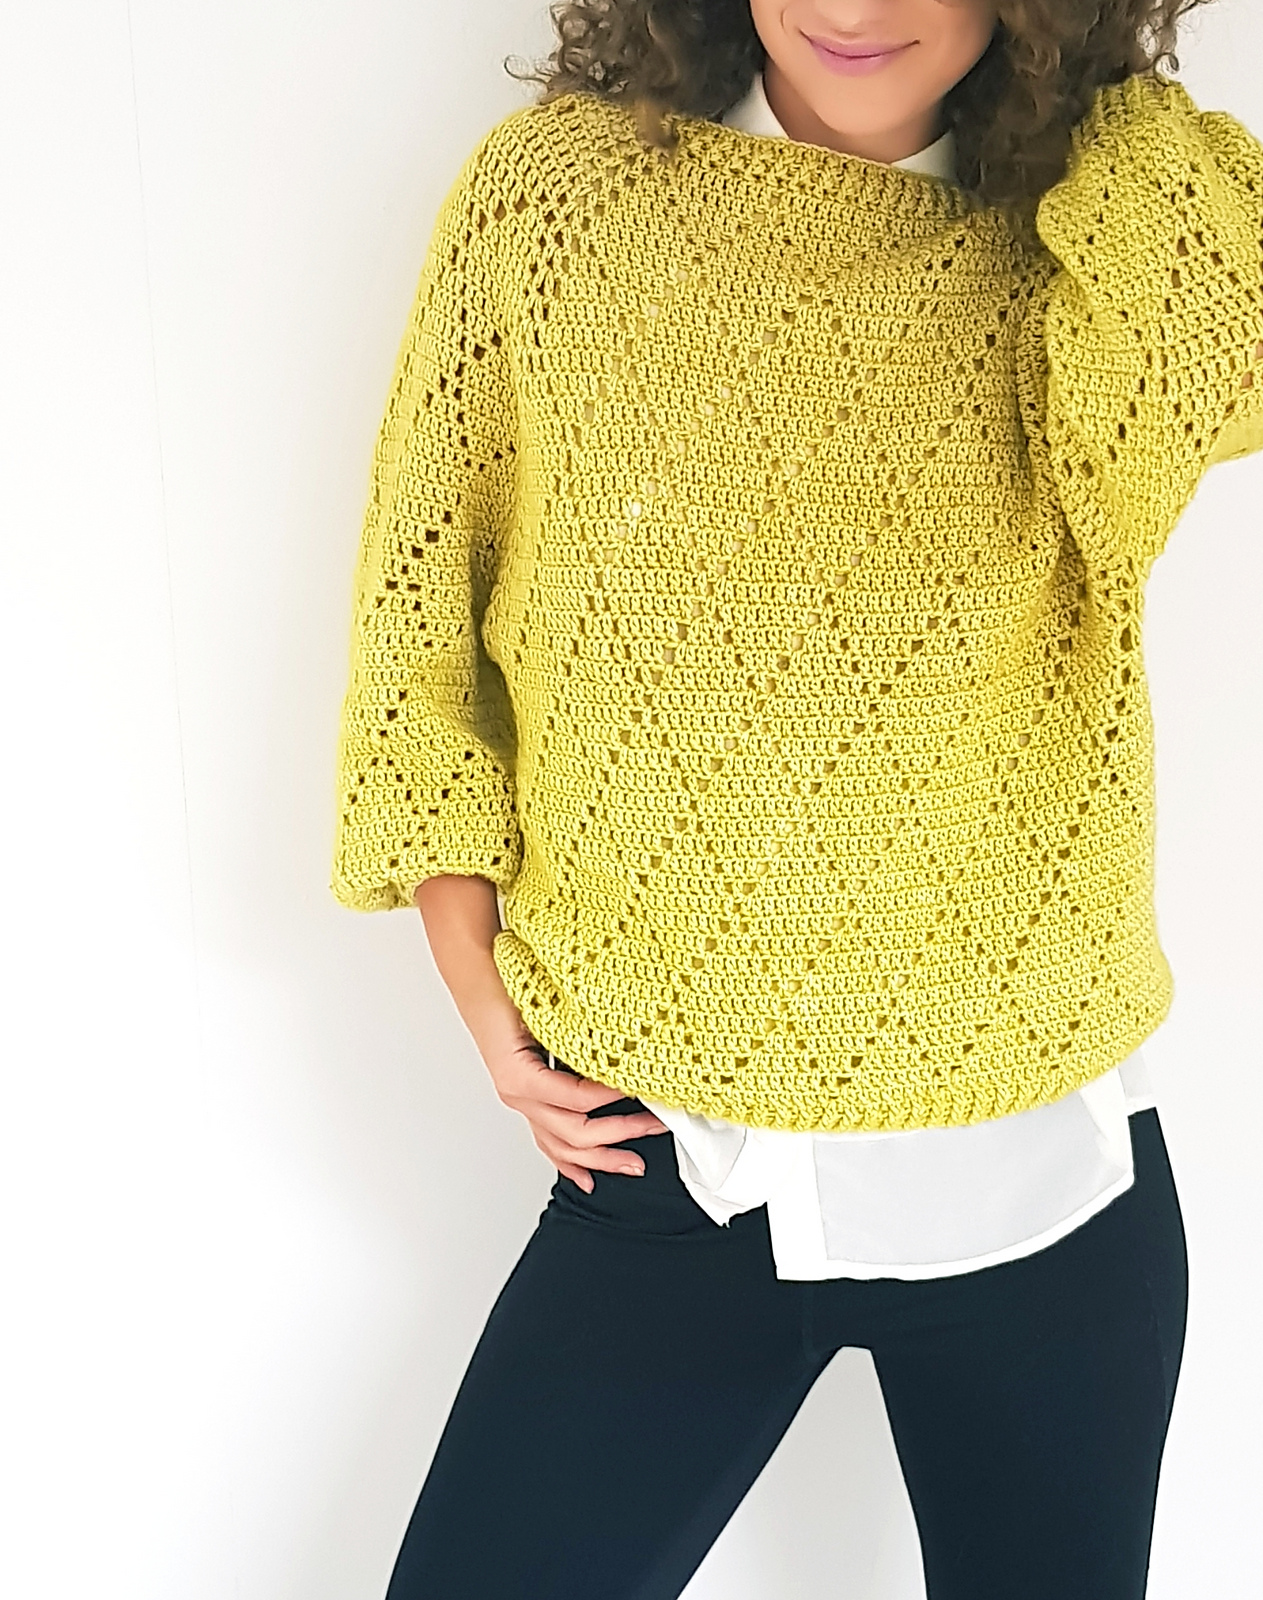 Crochet Pullover Pattern- So Easy , Soon You'll Know It Off By Heart